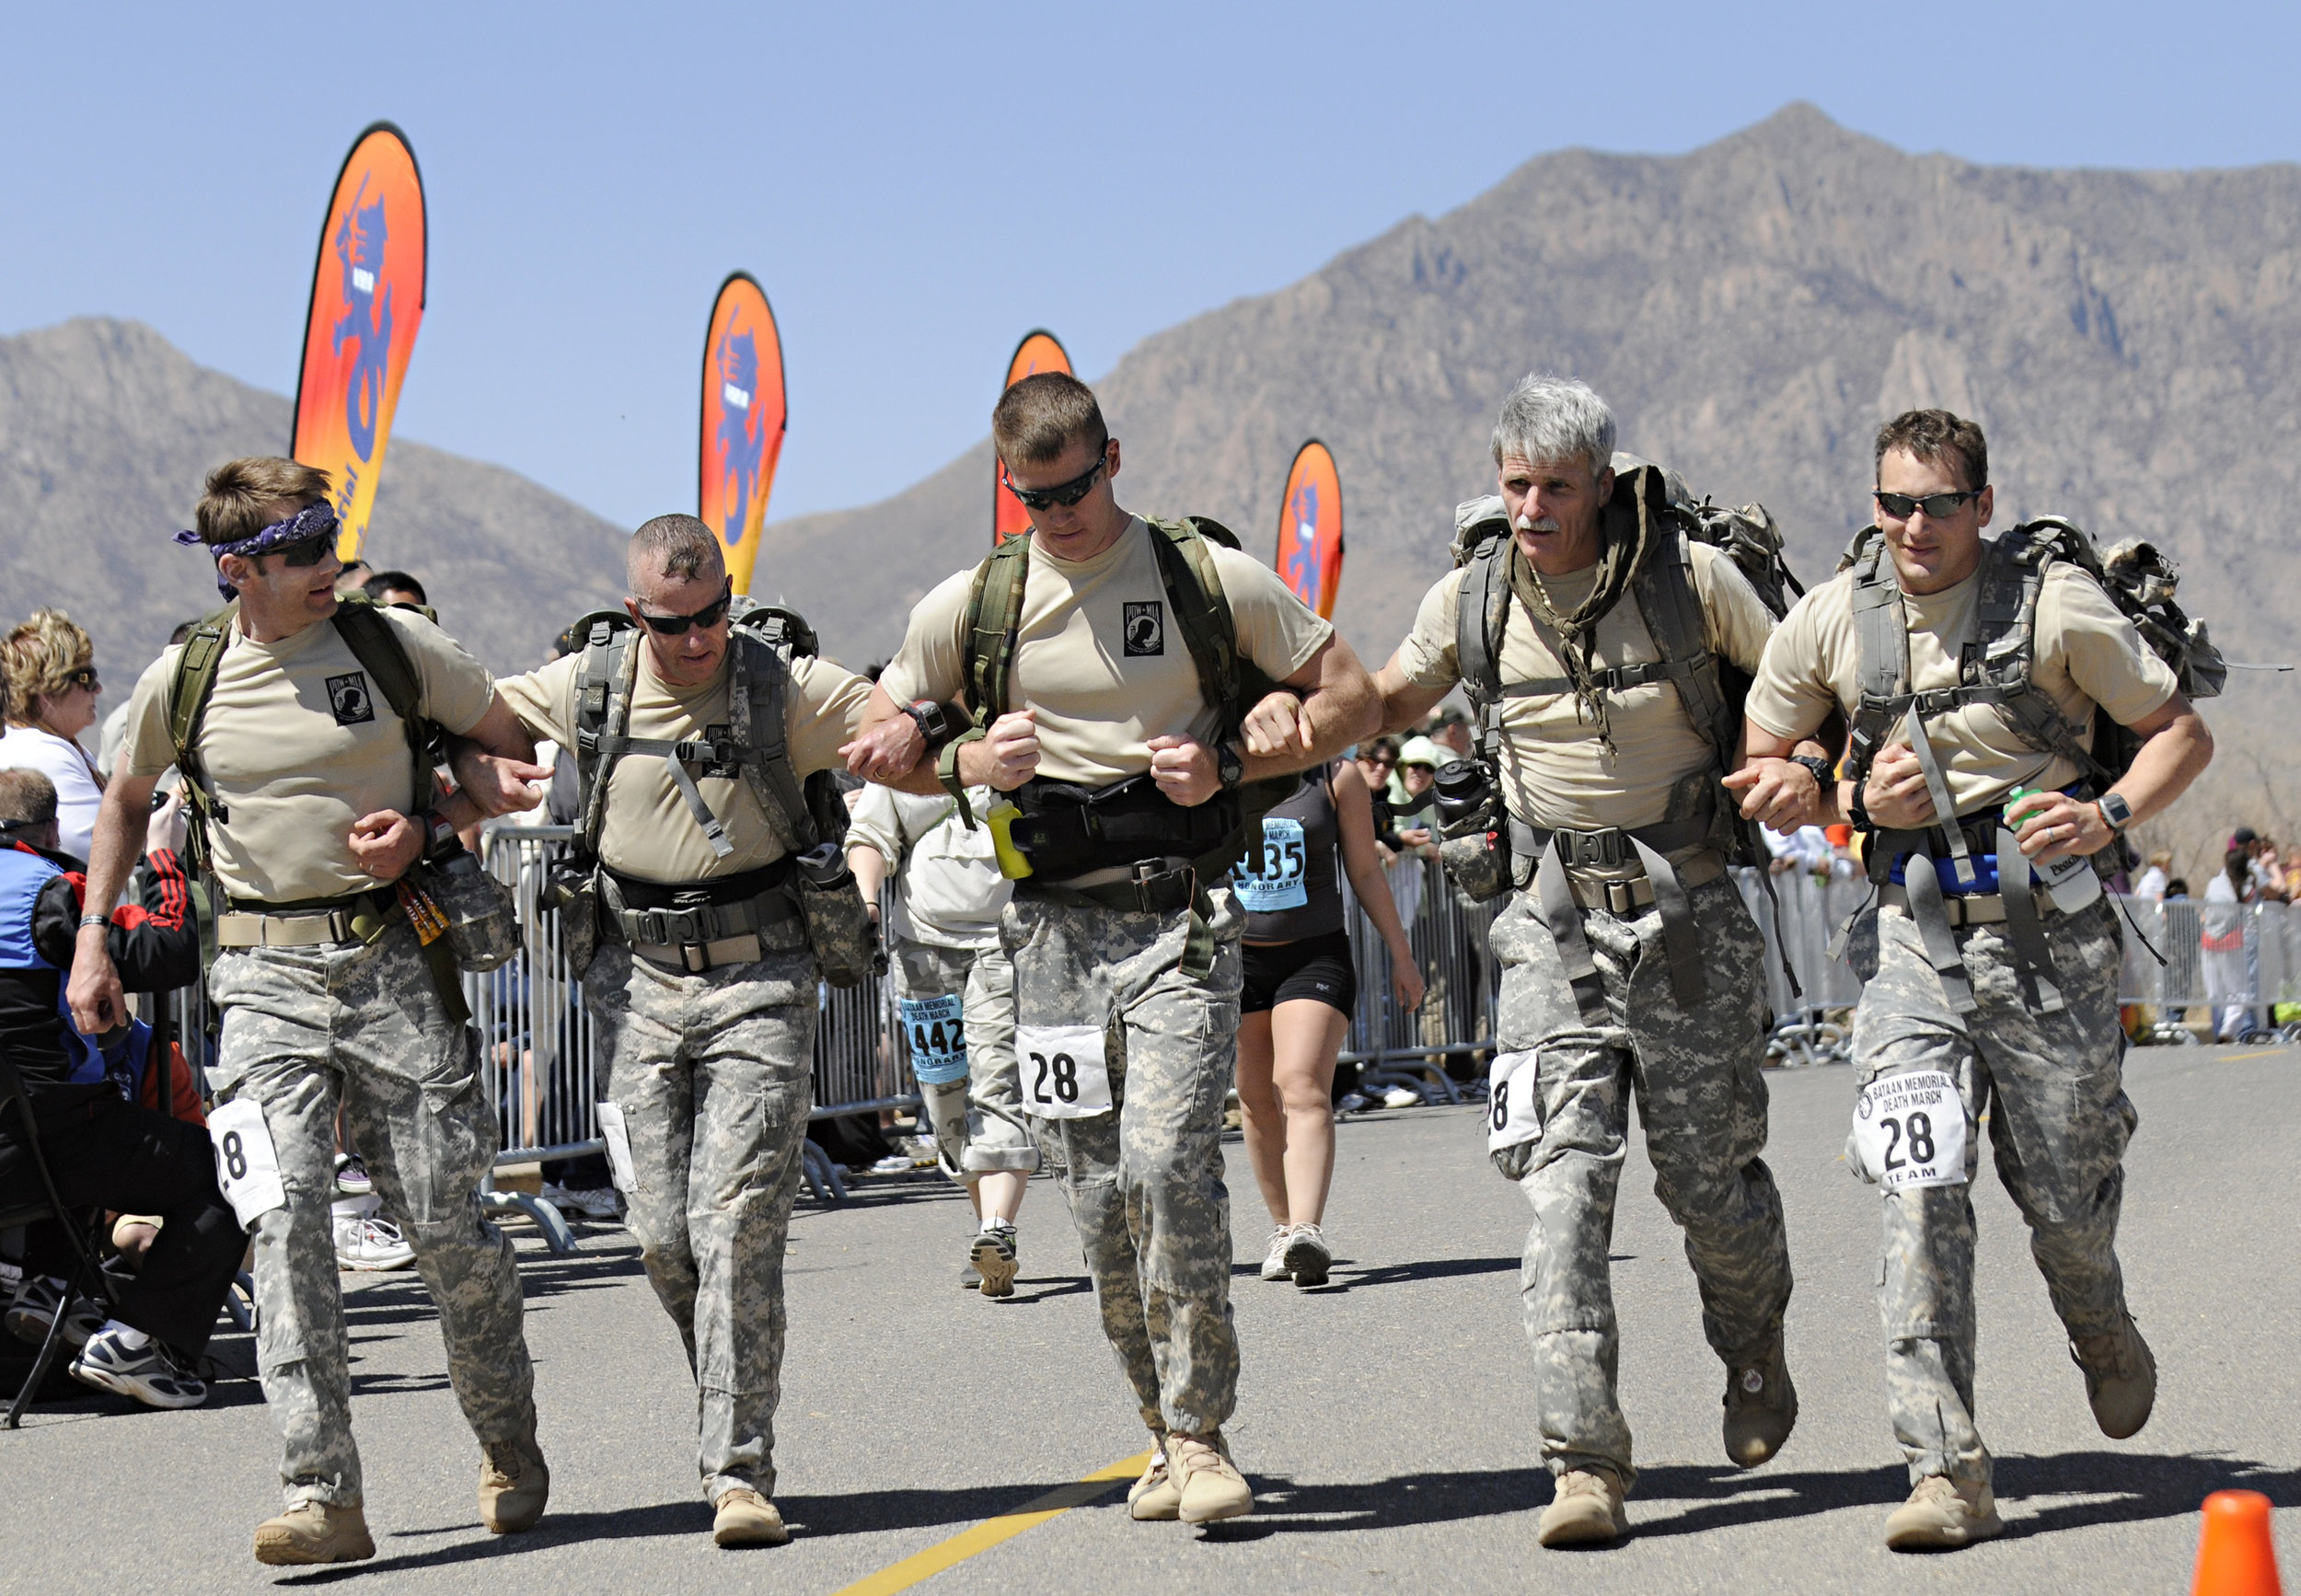  A team prepares to cross the finish line of their 26.2-mile run arm in arm during the 22nd Annual Bataan Memorial Death March at White Sands Missile Range, Sunday, March 27, 2011. (Morgan Petroski/Albuquerque Journal) 